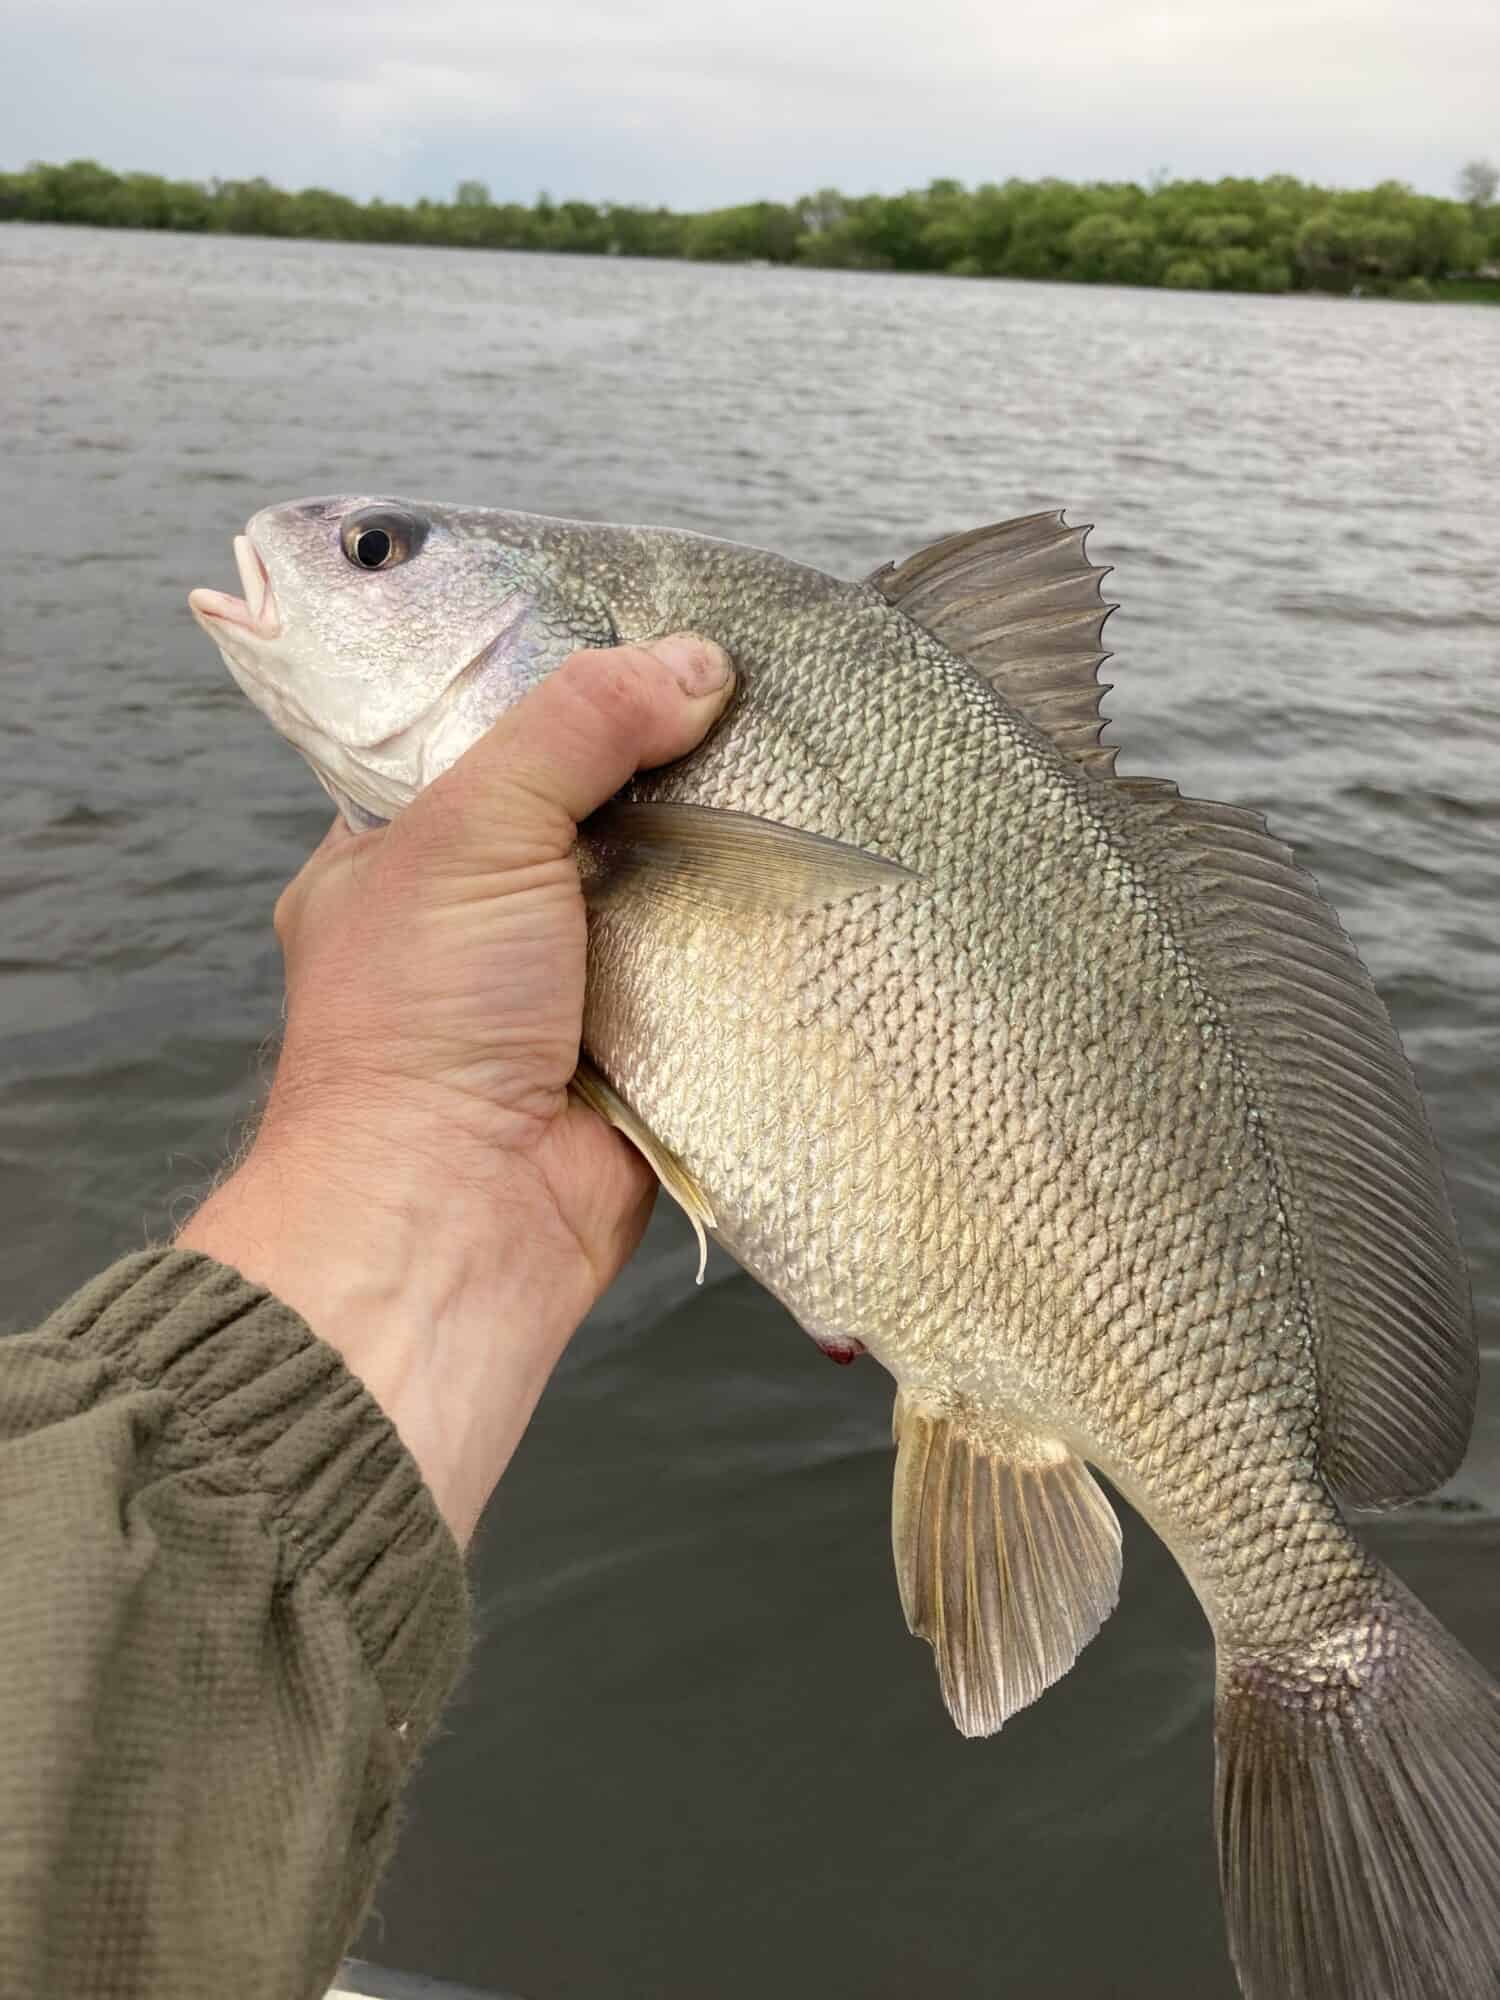 Freshwater Drum also known as a Sheephead